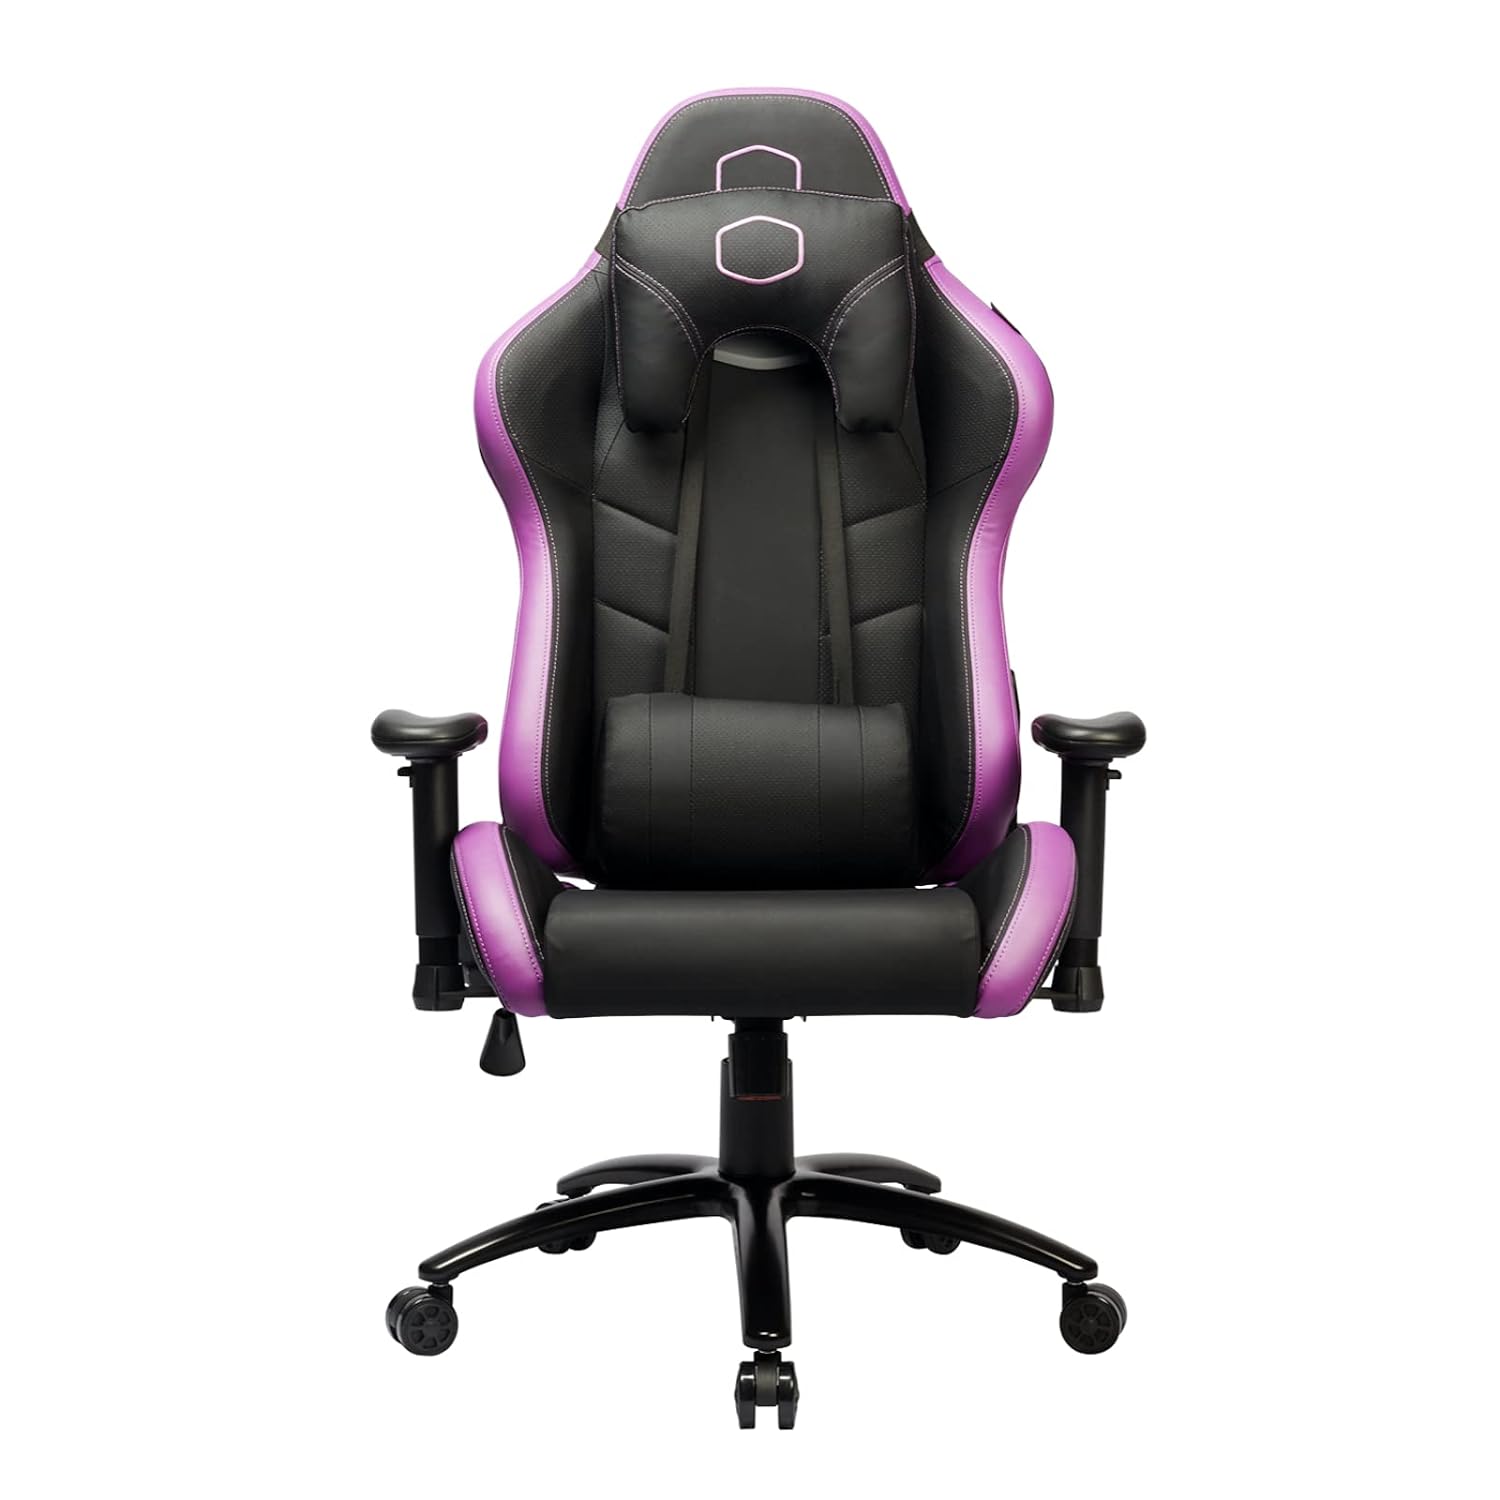 Caliber R2 Gaming Chair with 2D Armrest and 150kg Weight Limit